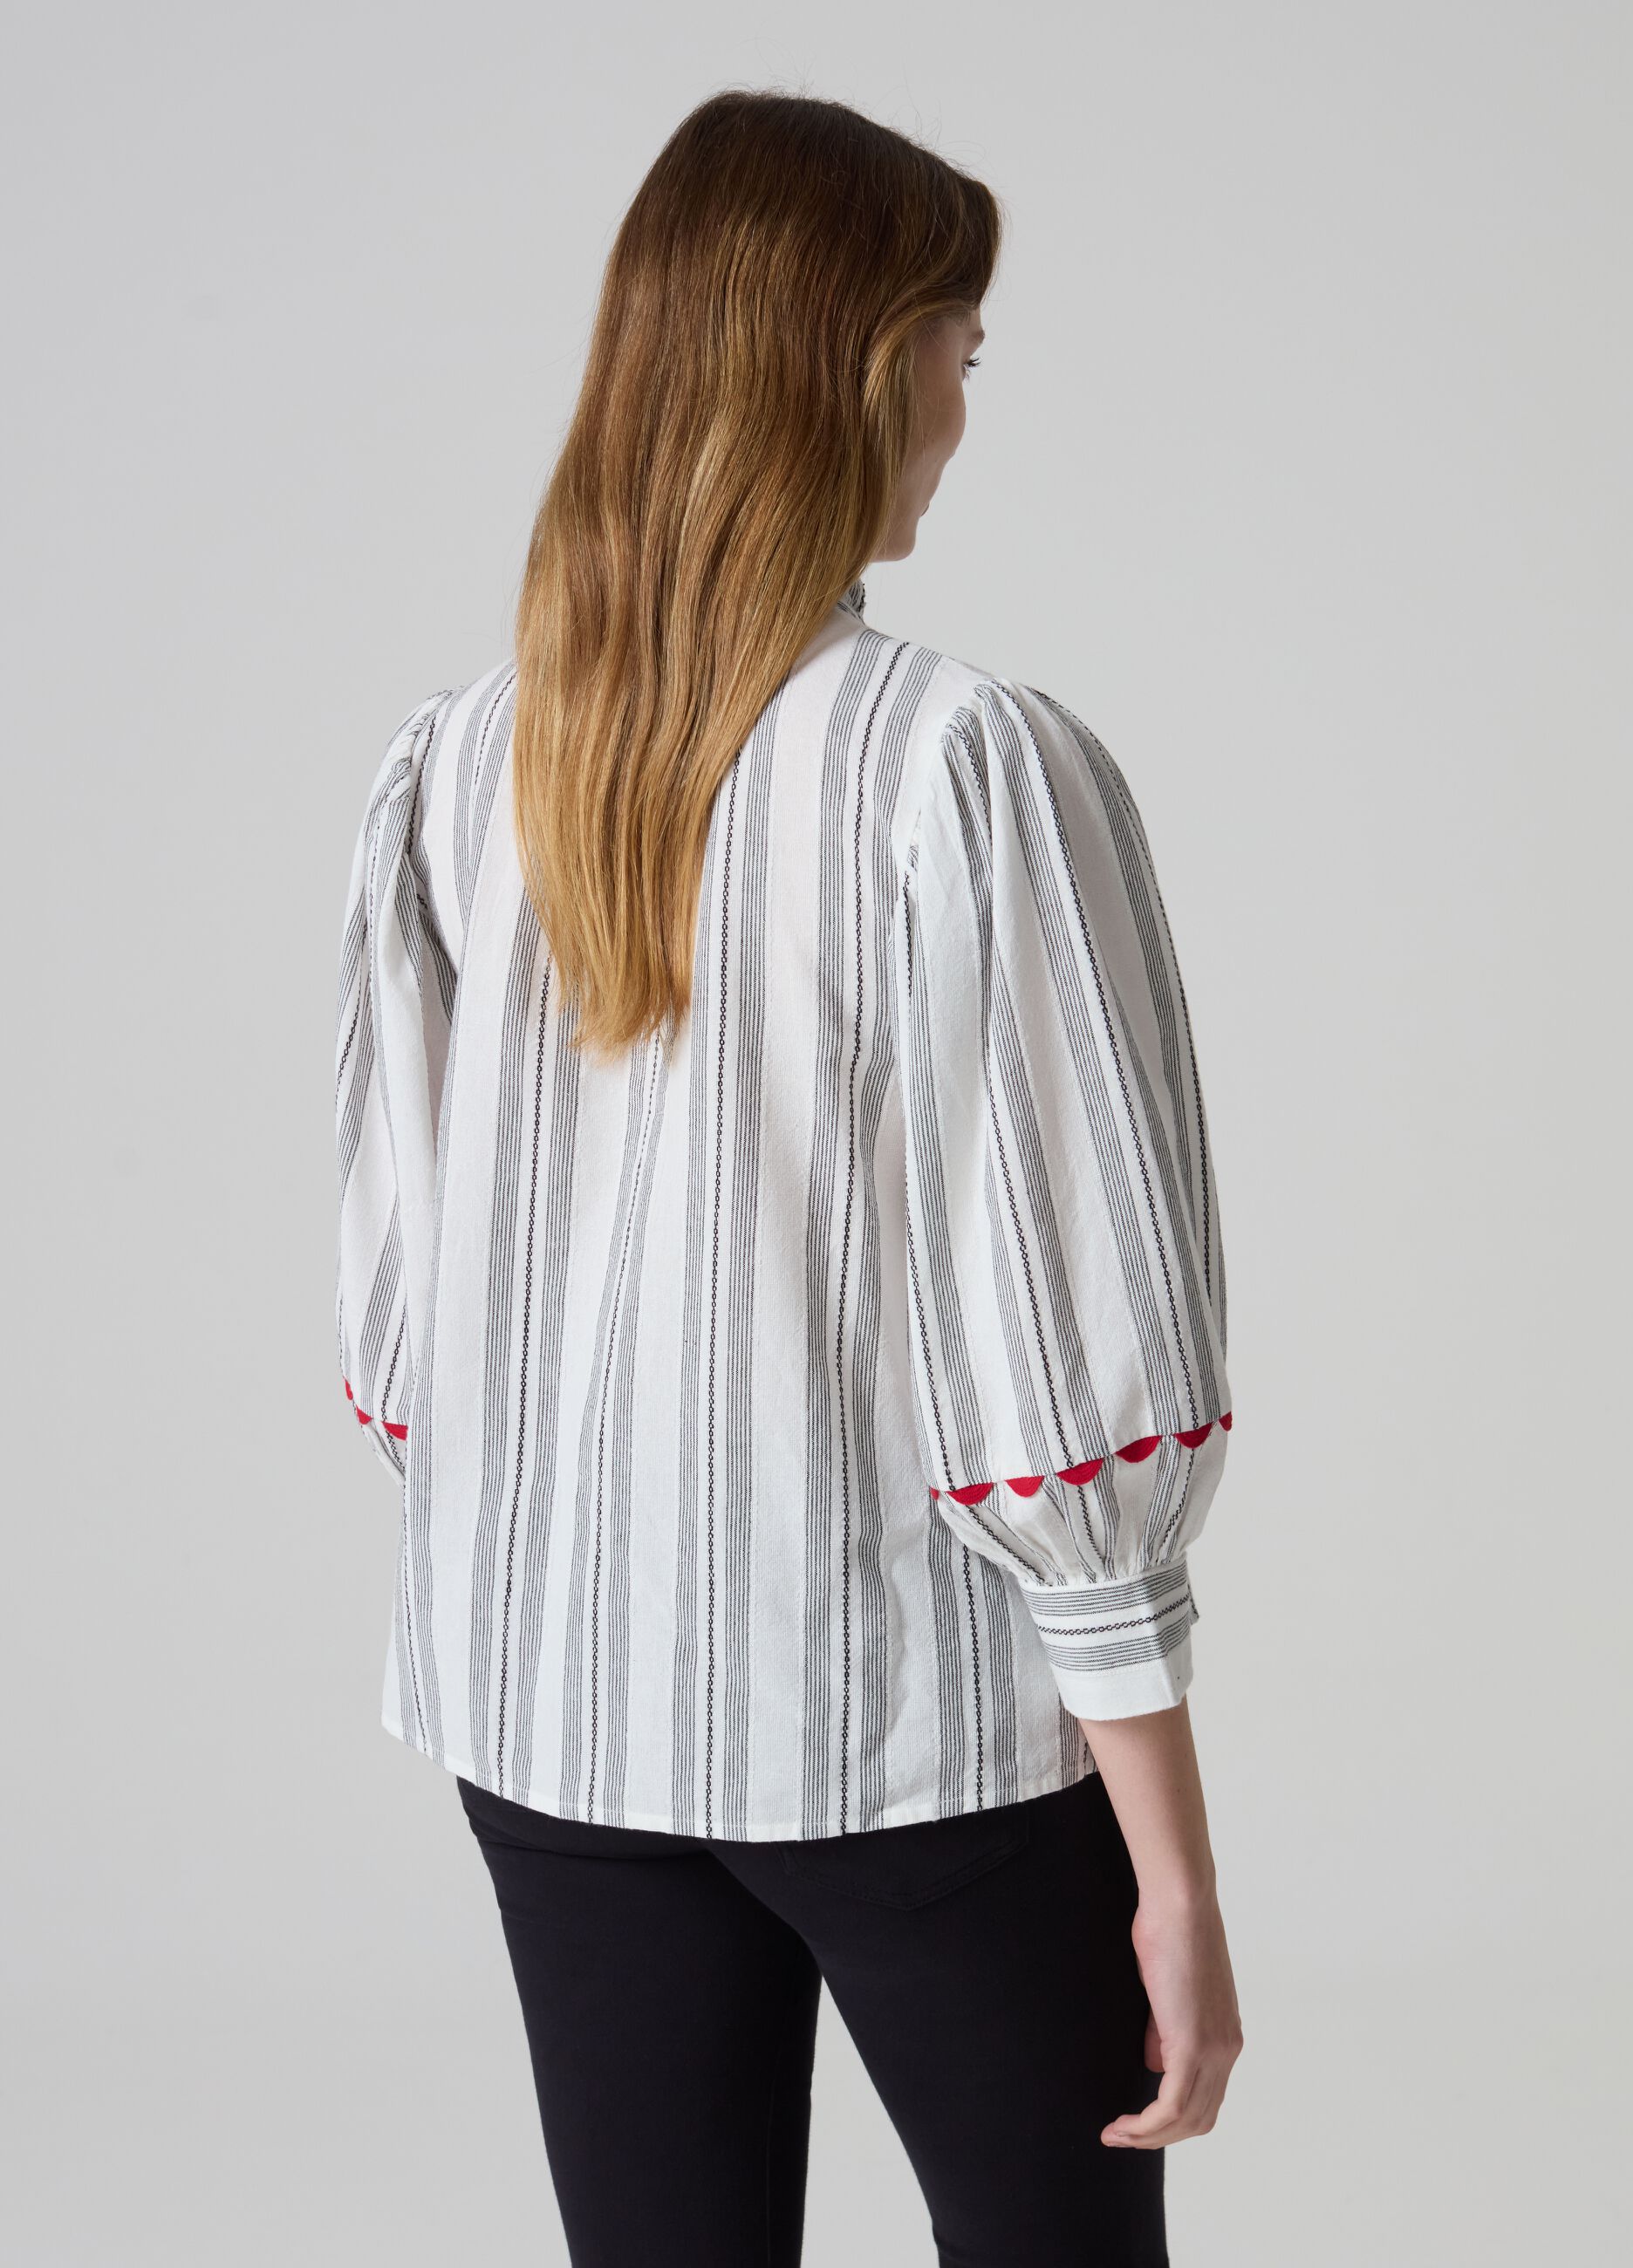 Striped blouse with flowers embroidery